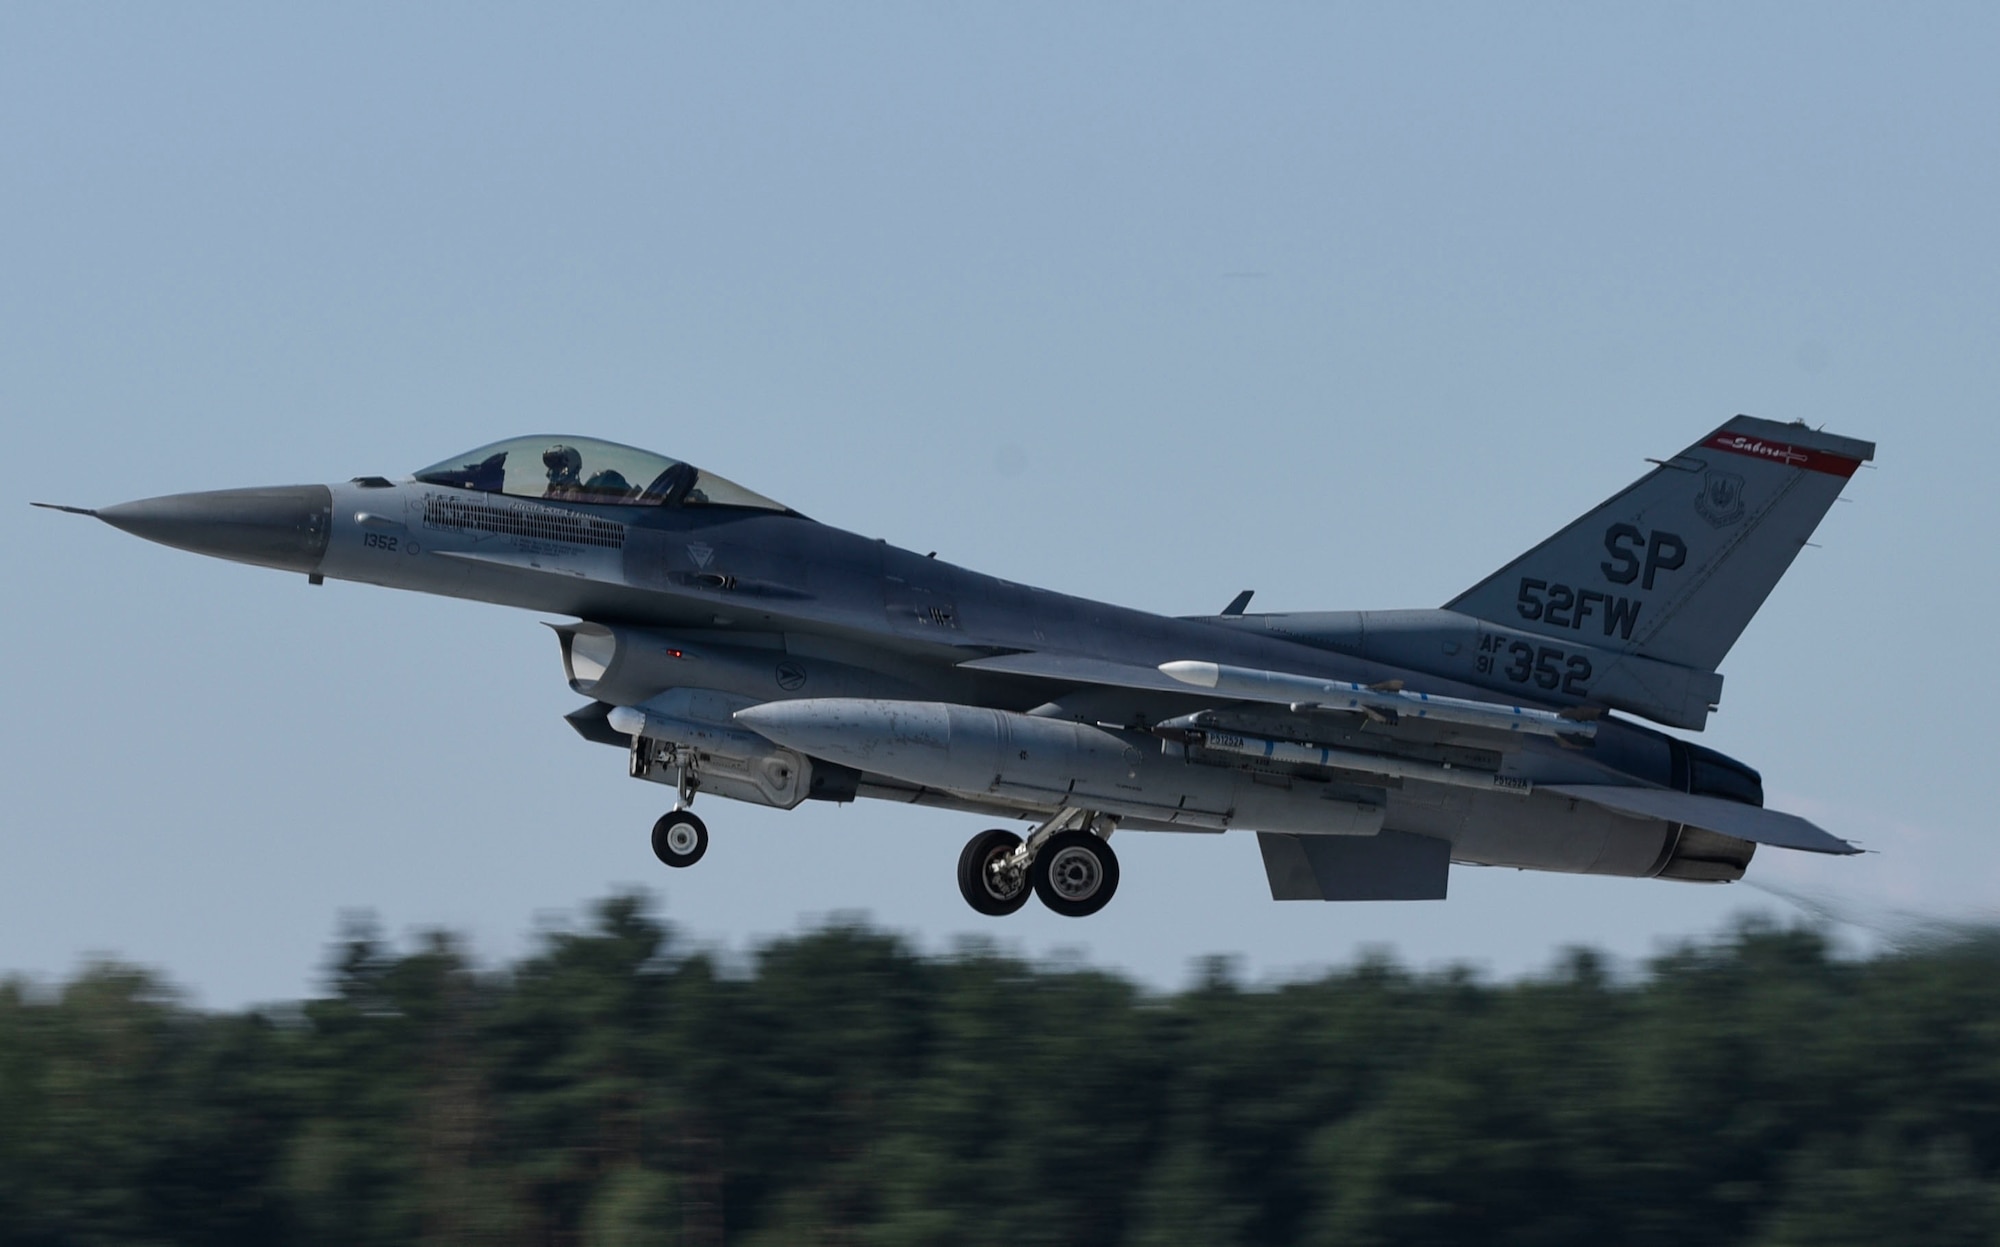 A U.S. Air Force F-16 Fighting Falcon, assigned to the 480th Expeditionary Fighter Squadron, takes off at Łask AB, Poland, August 21, 2020. The 480th EFS deployed to the 32nd Tactical Air Base in Łask AB, Poland, to participate in Aviation Detachment Rotation 20.4 in support of Operation Atlantic Resolve. (U.S. Air Force photo by Senior Airman Melody W. Howley)